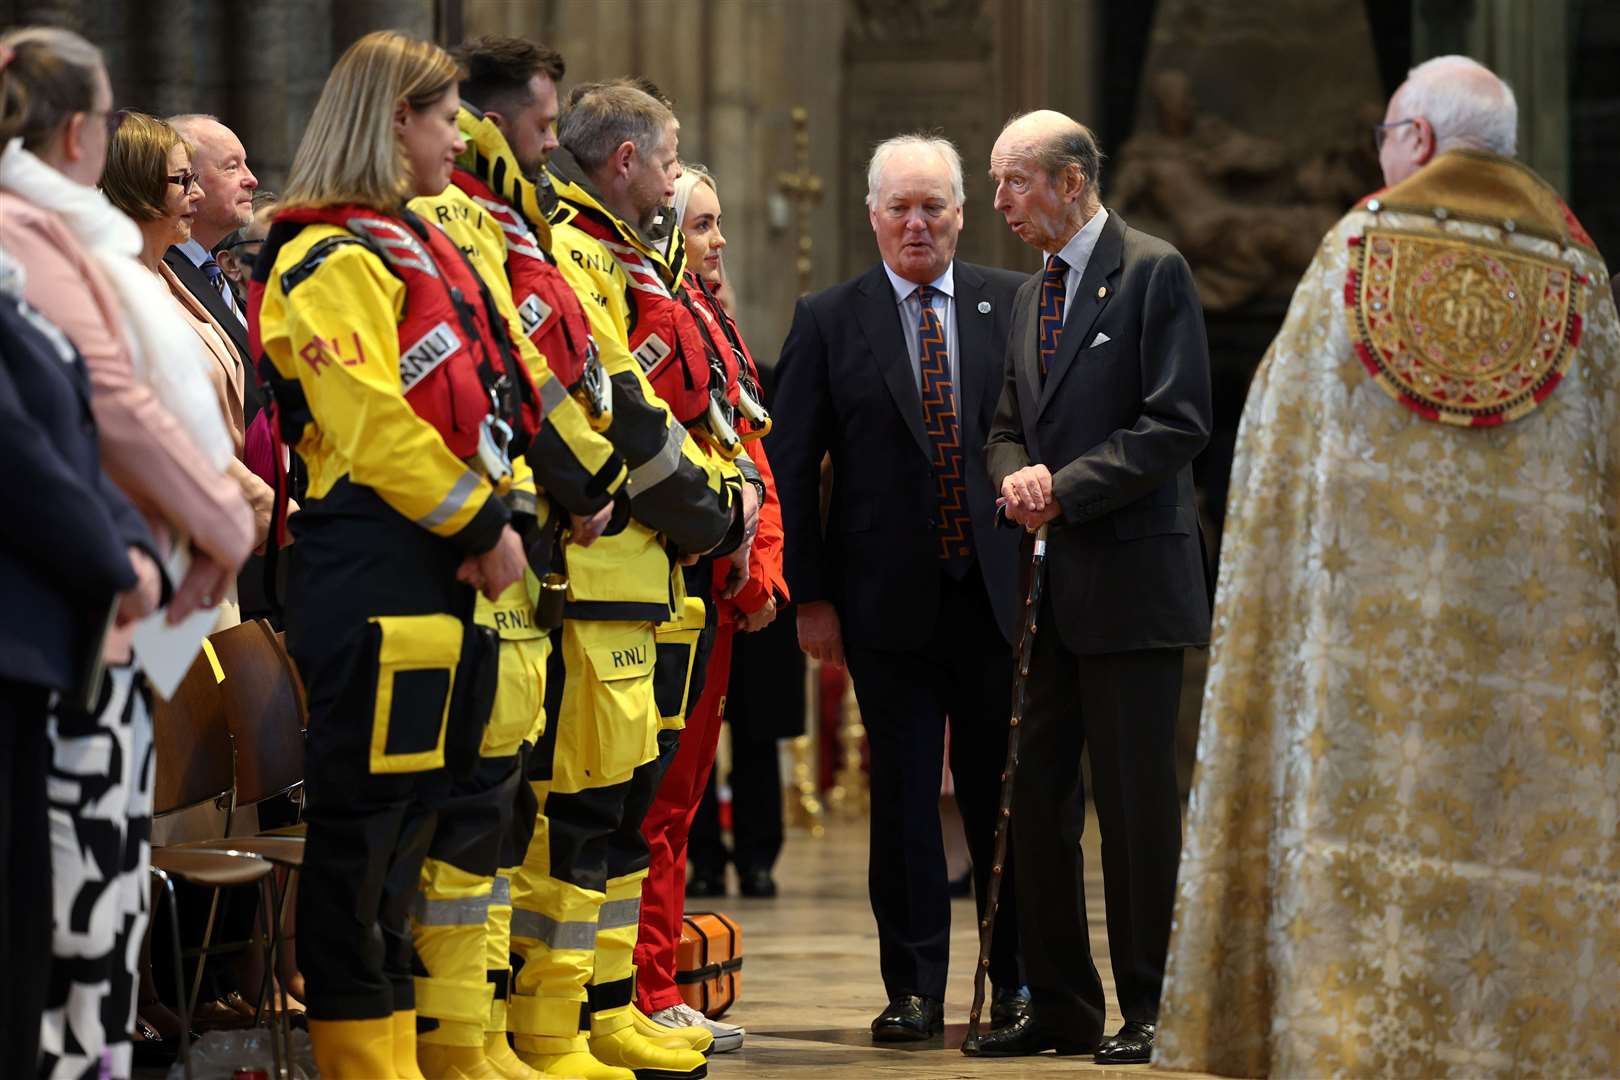 The Duke of Kent (second from right) arrives to attend the service of thanksgiving